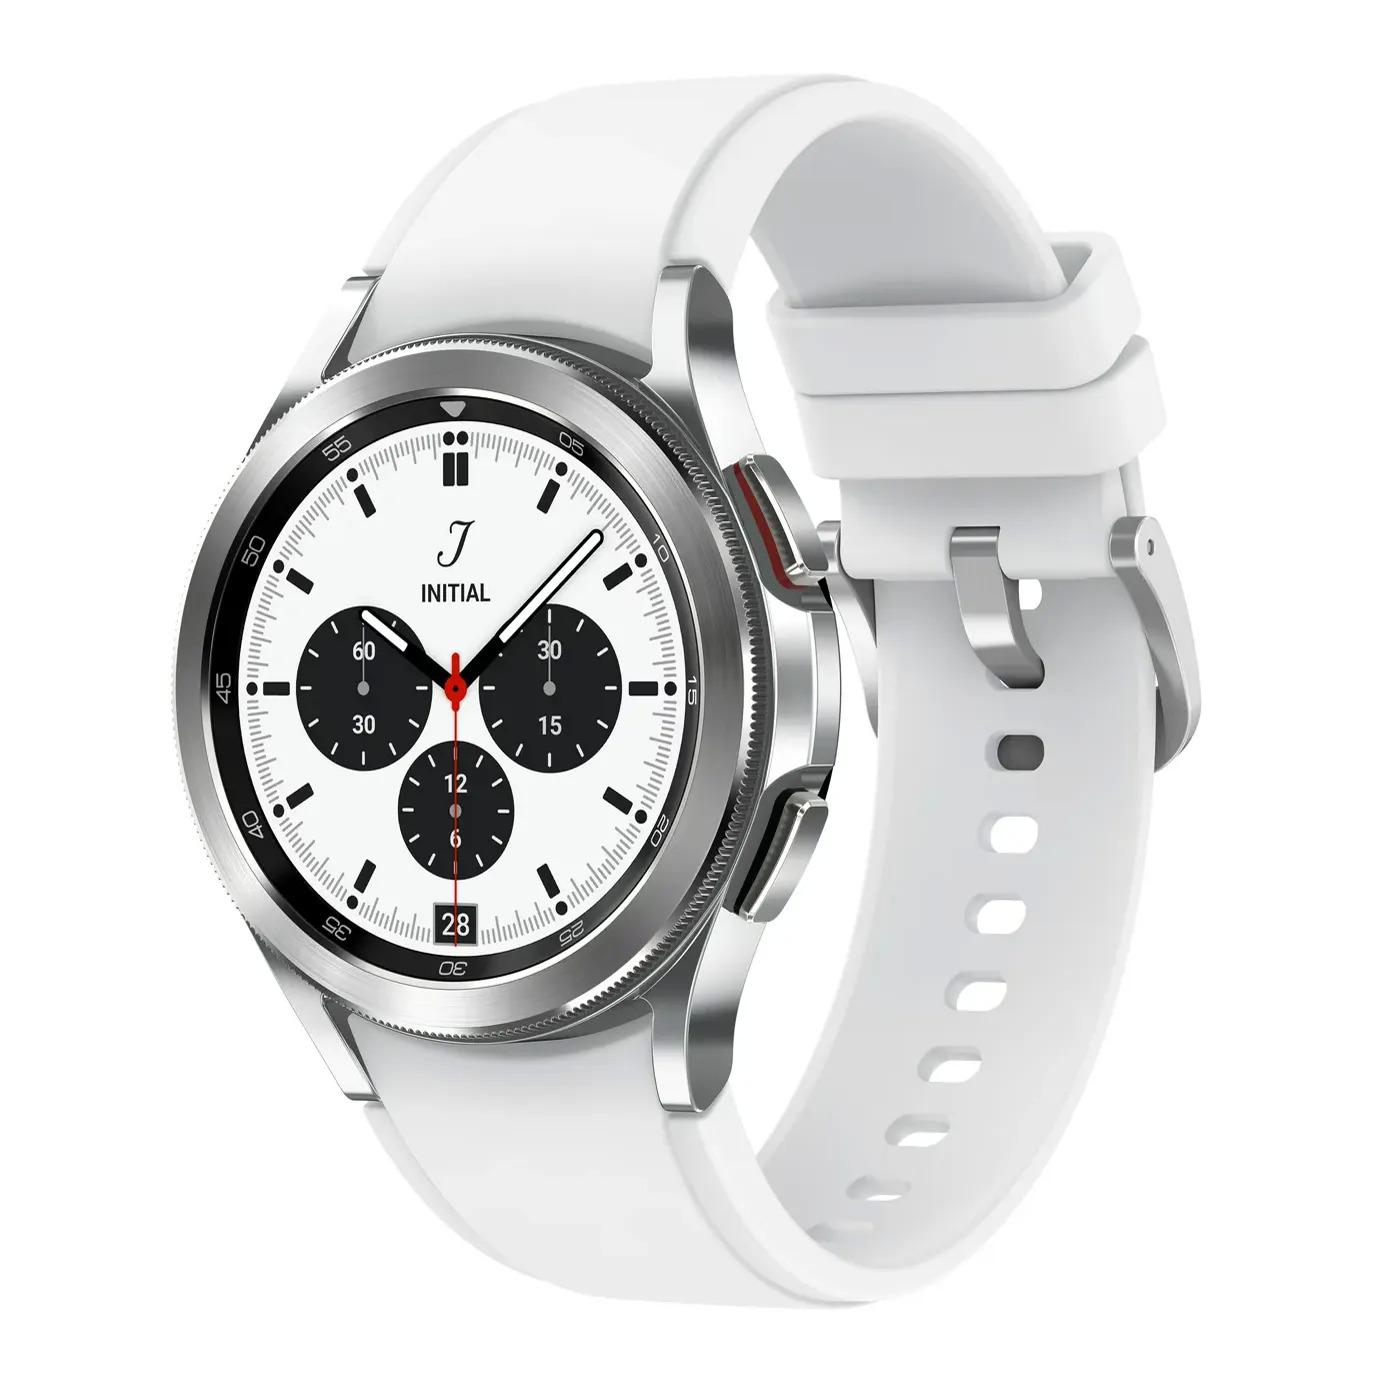 Samsung Galaxy Watch 4 Classic 42mm Smartwatch for $149 Shipped